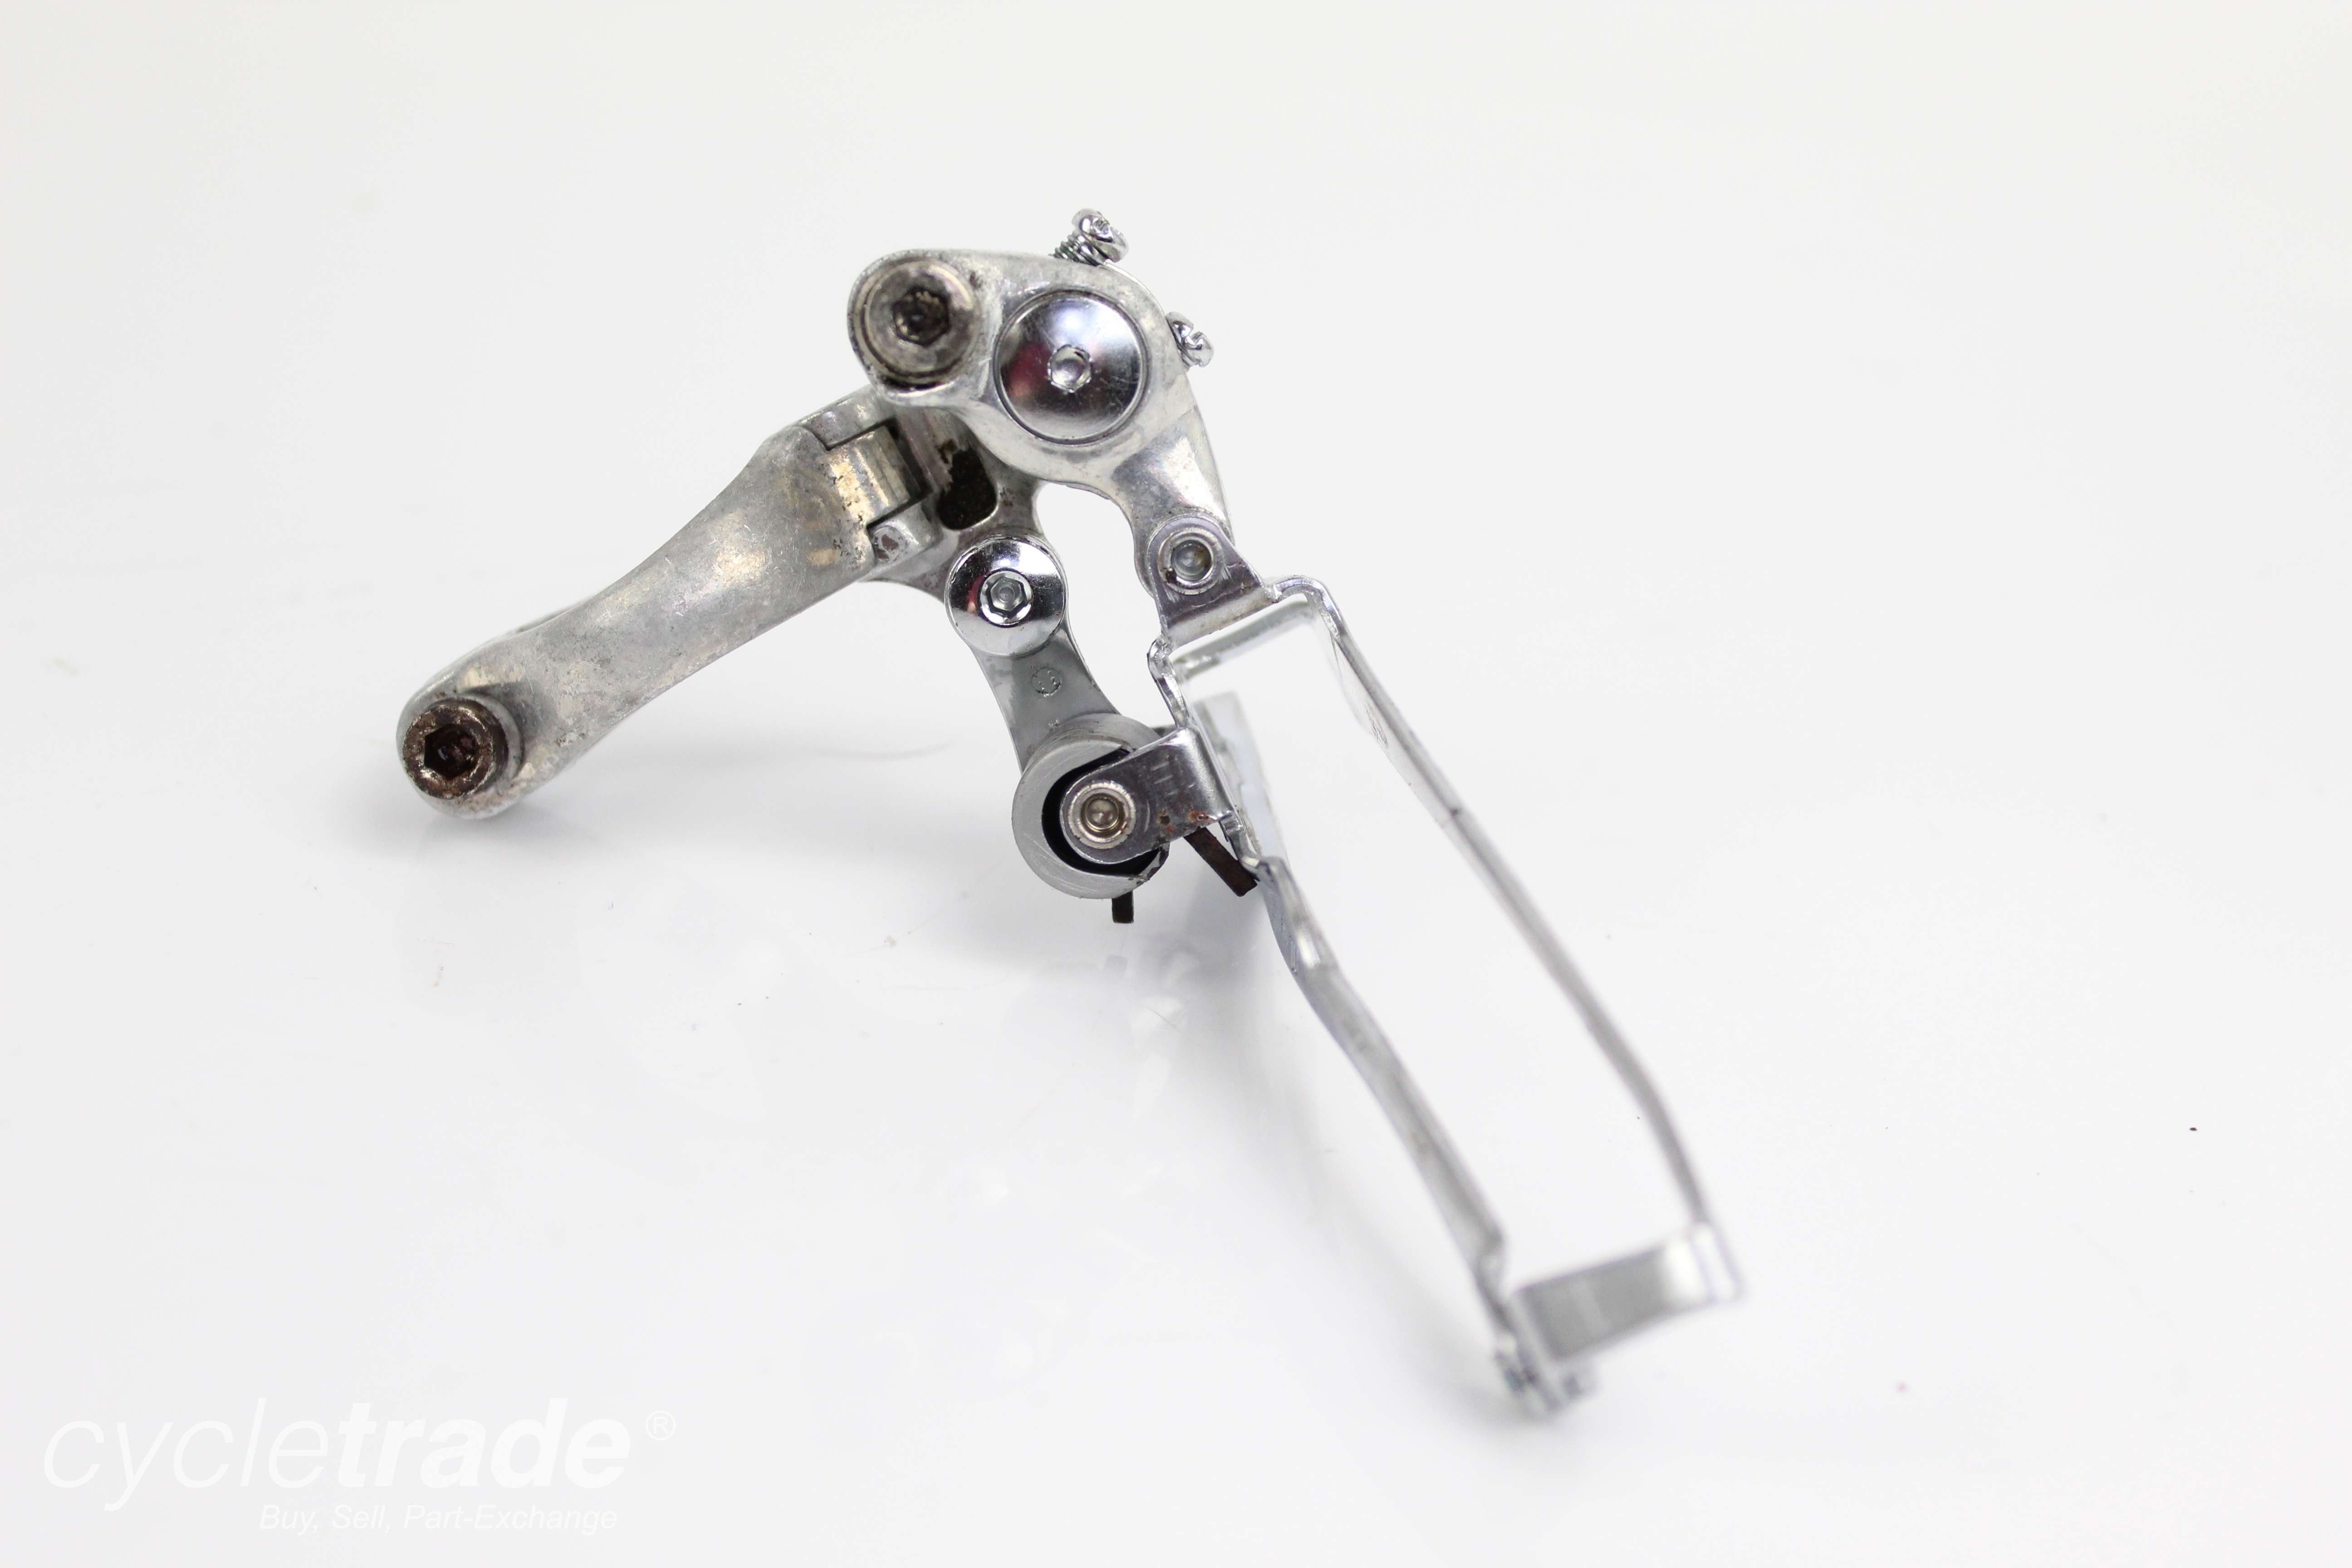 Front Derailleur- Shimano RX100 FD-A551 2x8 Speed 28.6mm Clamp-On - Grade C+